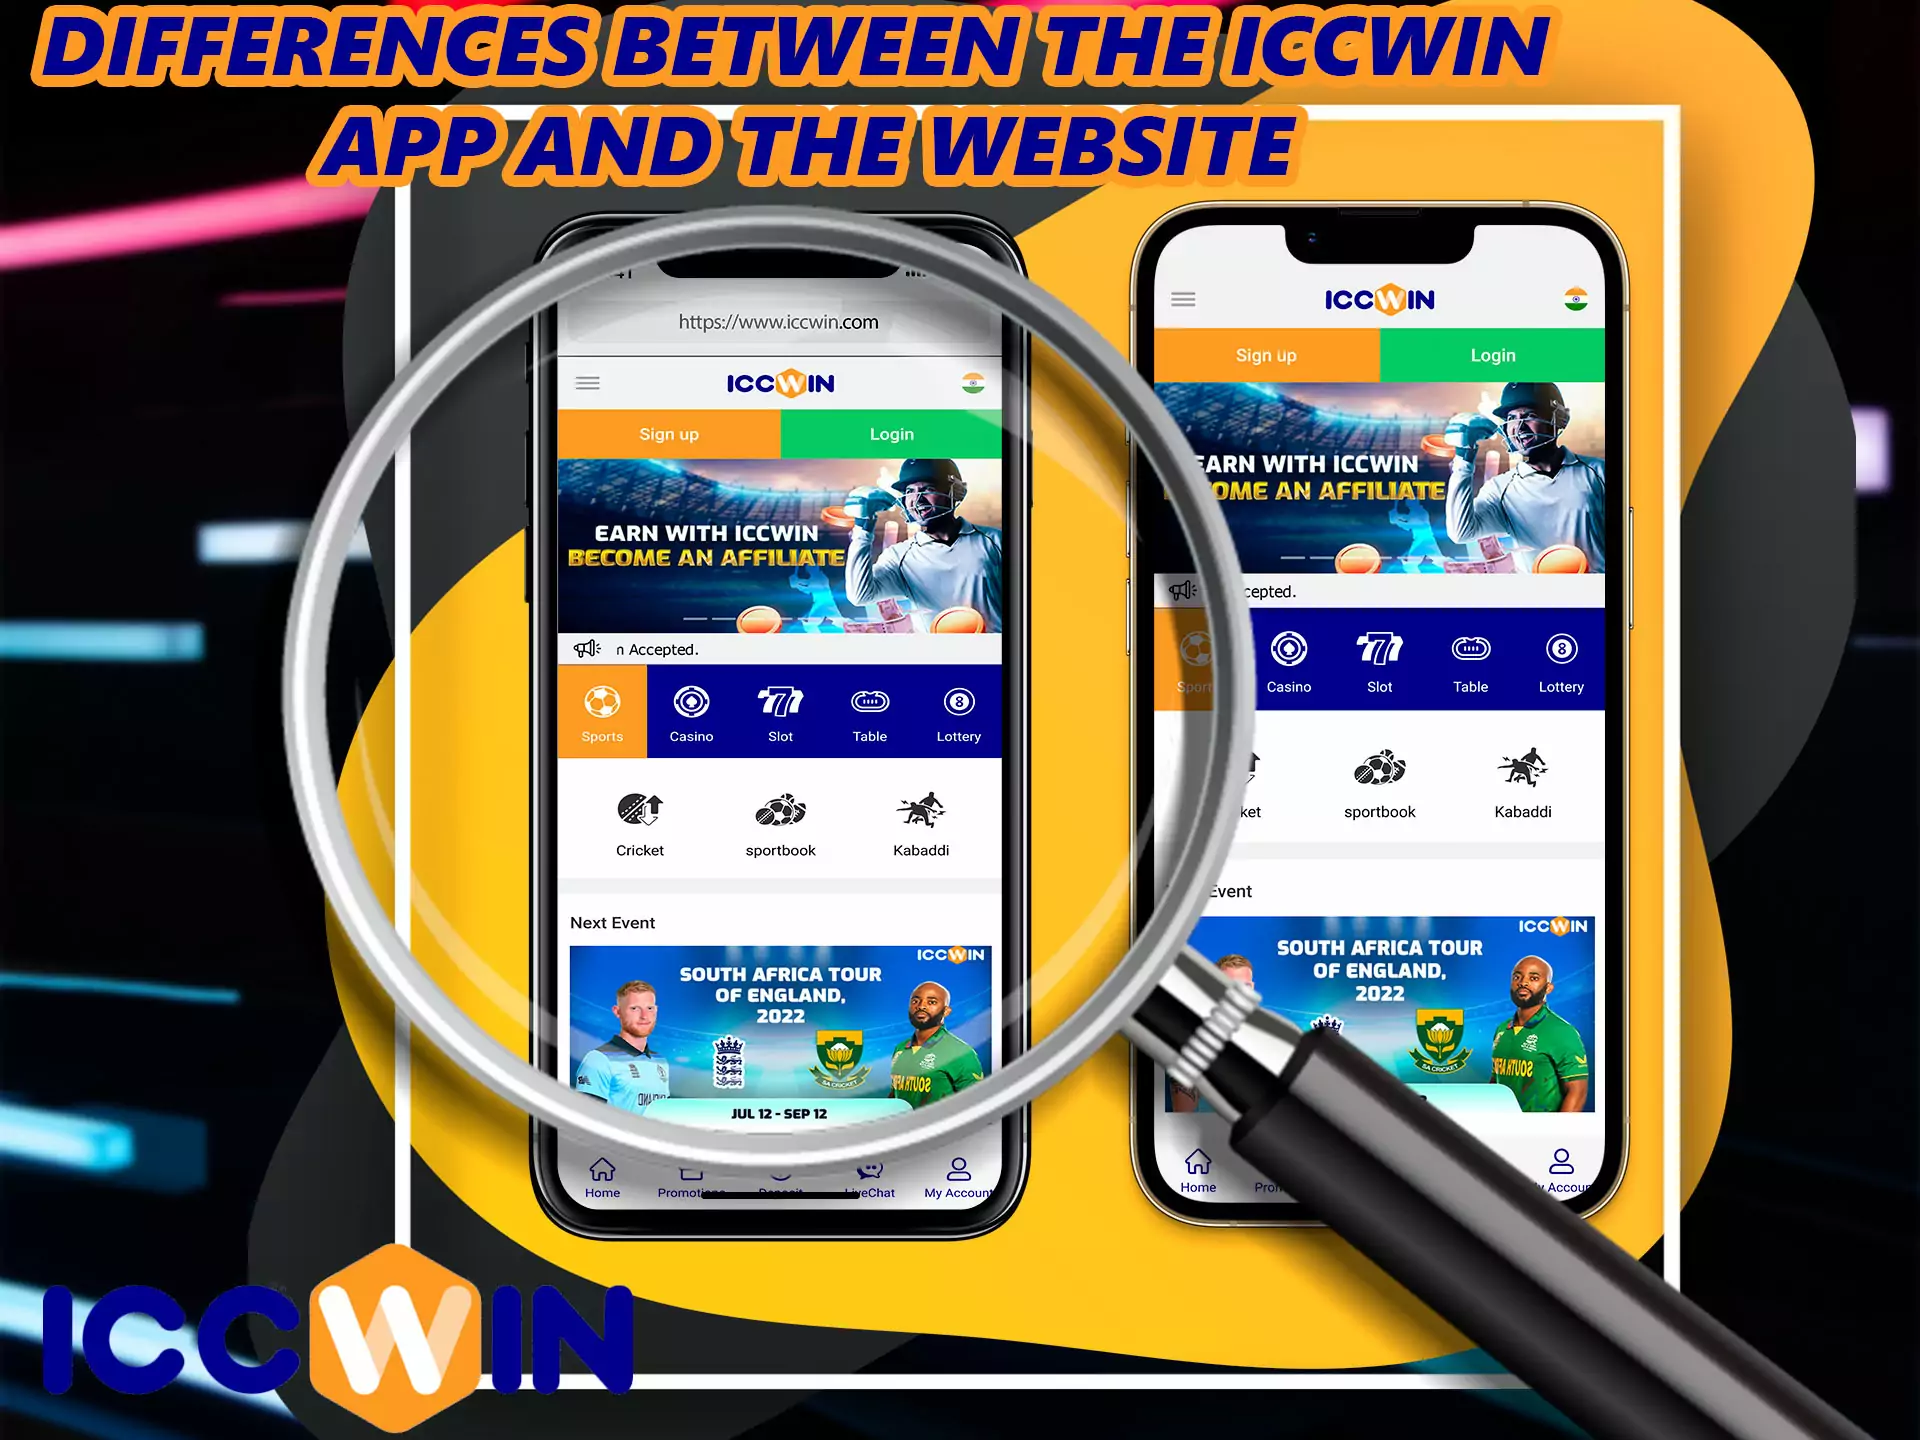 The bookmaker has a very simple mobile site, deposits, withdrawals and many other activities are available on smartphones of various operating systems.